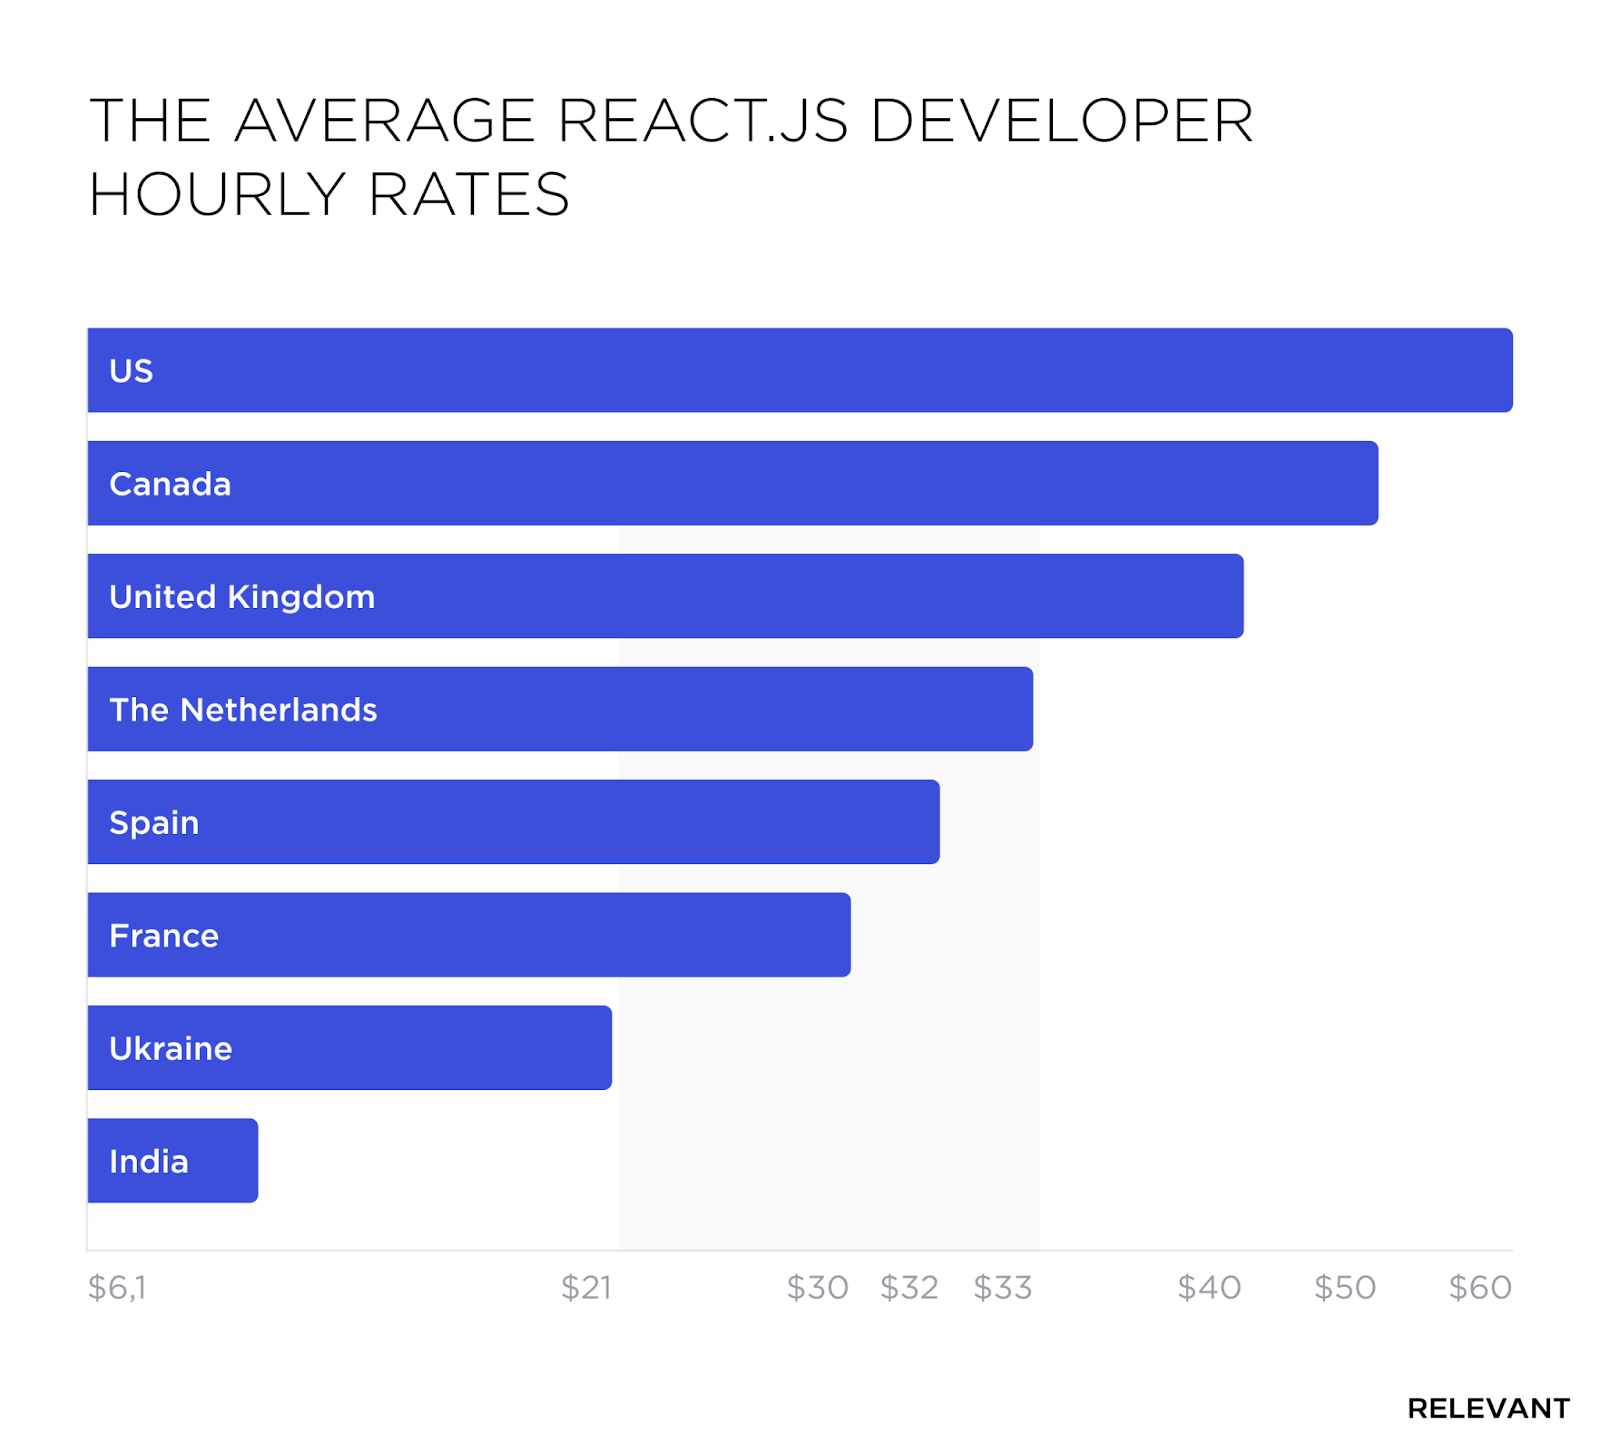 Hourly rates of React.js developers